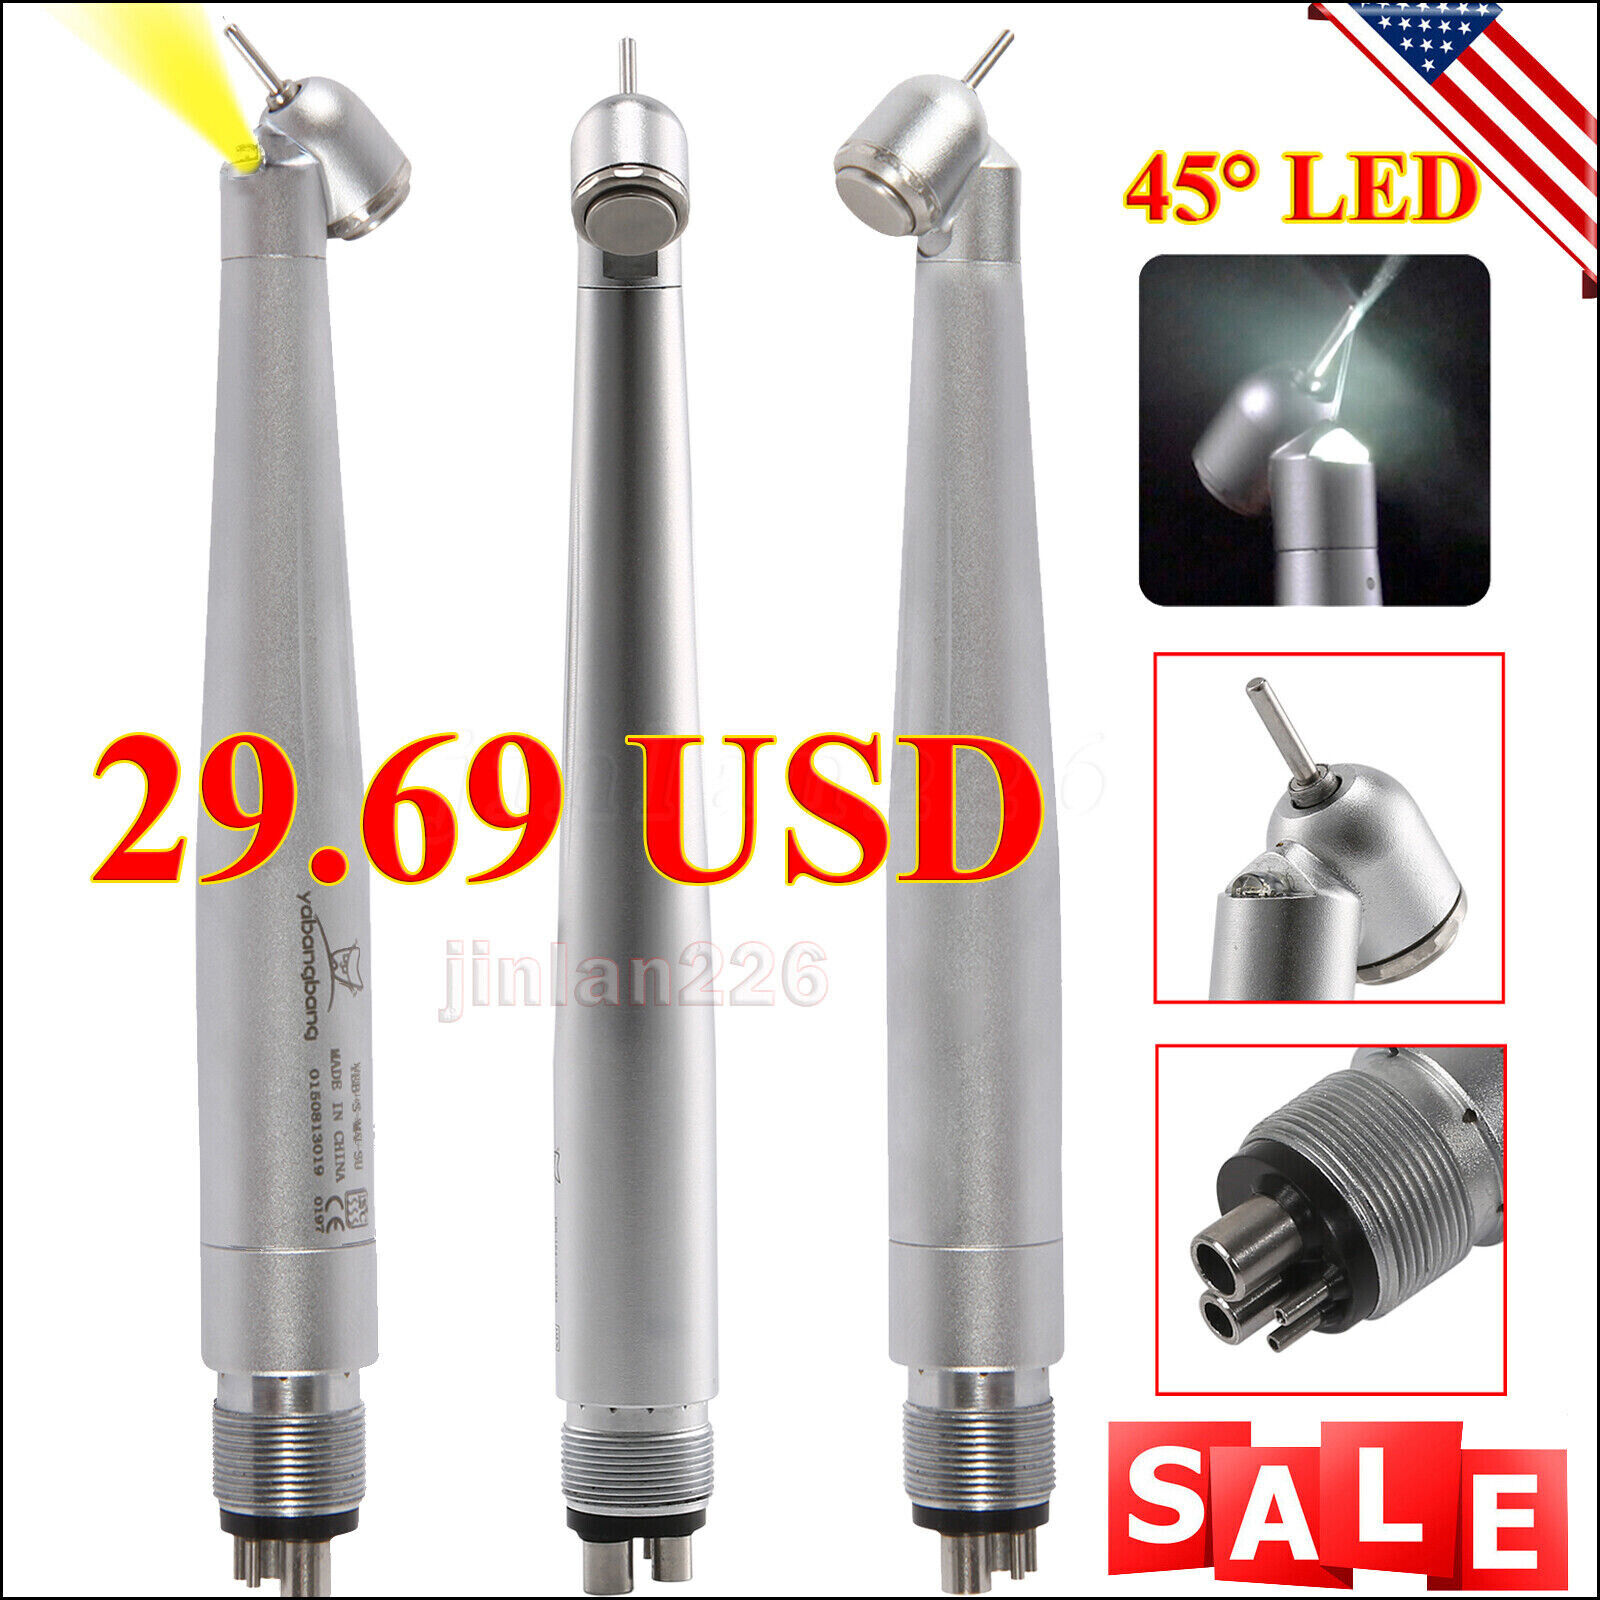 NSK Style Dental LED 45° Degree Surgical High Speed Handpiece Push Button 4 Hole